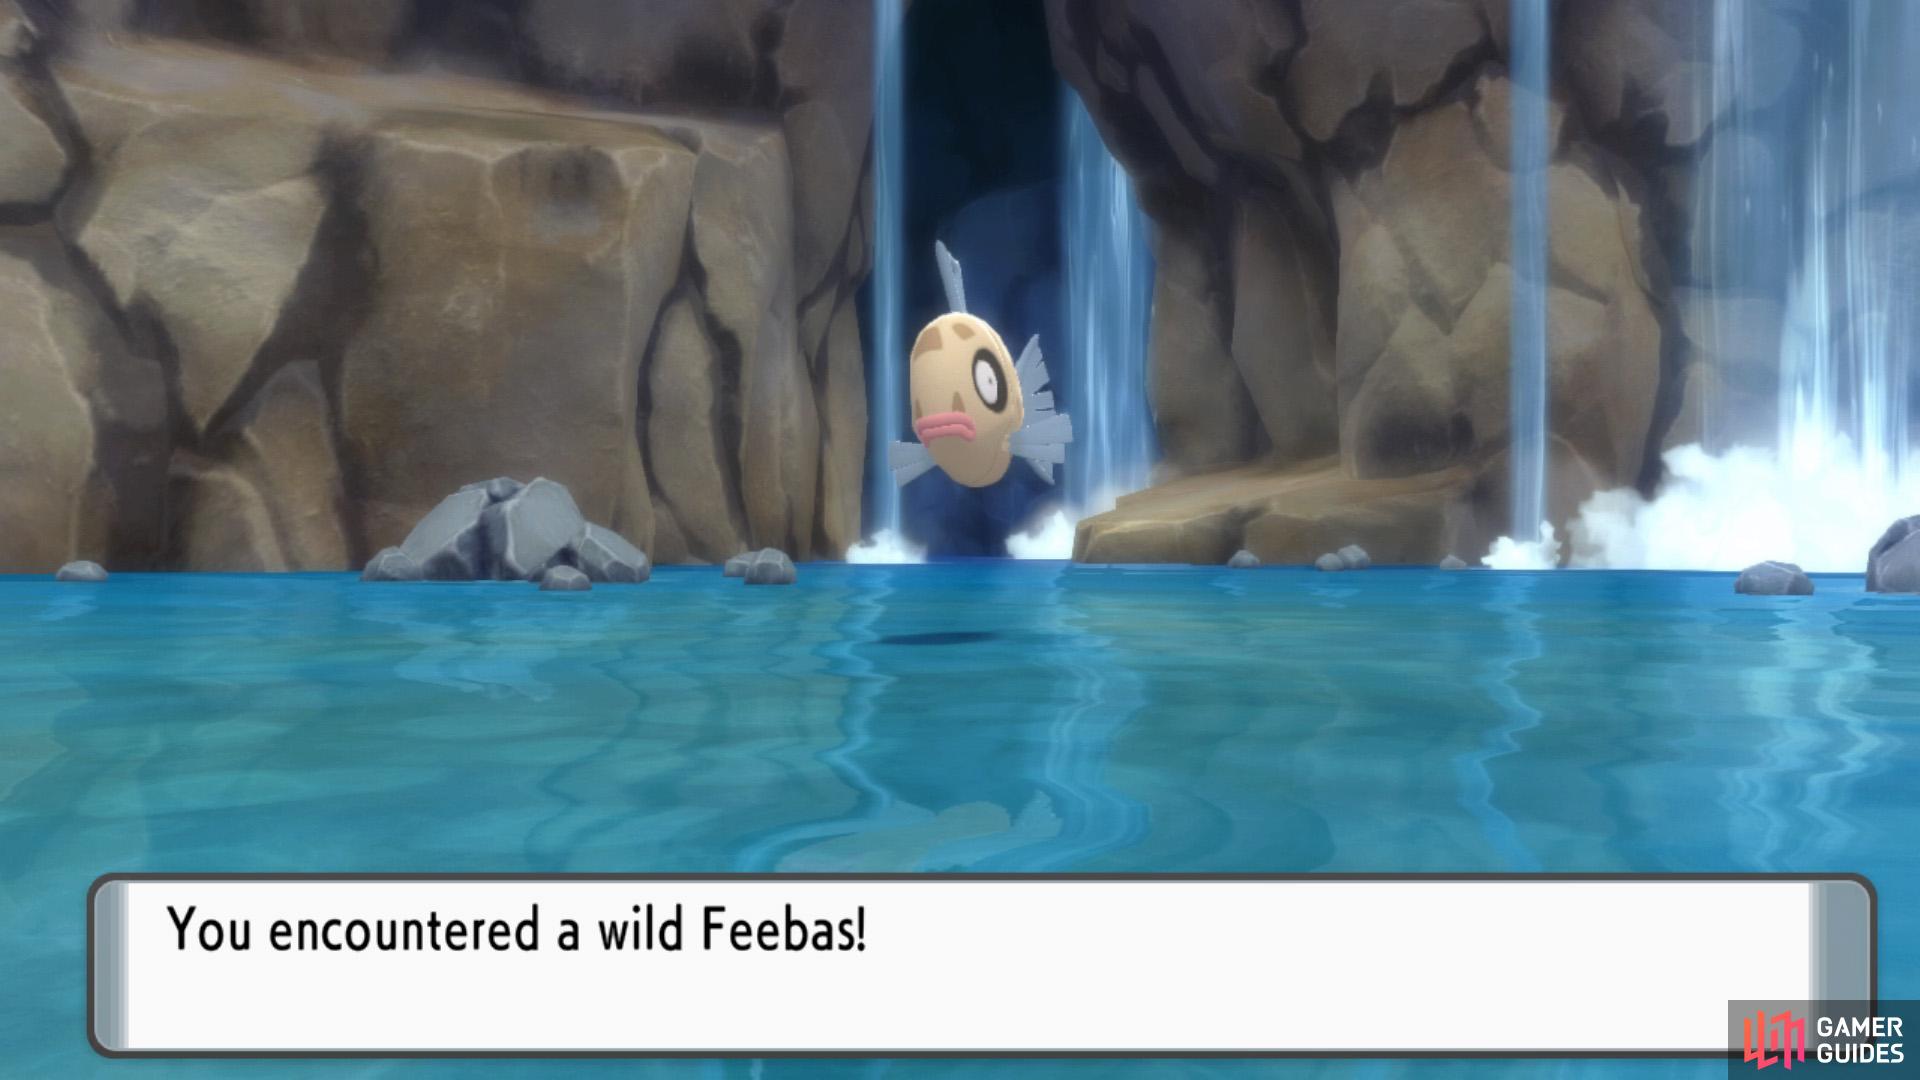 There we go! Feebas found!